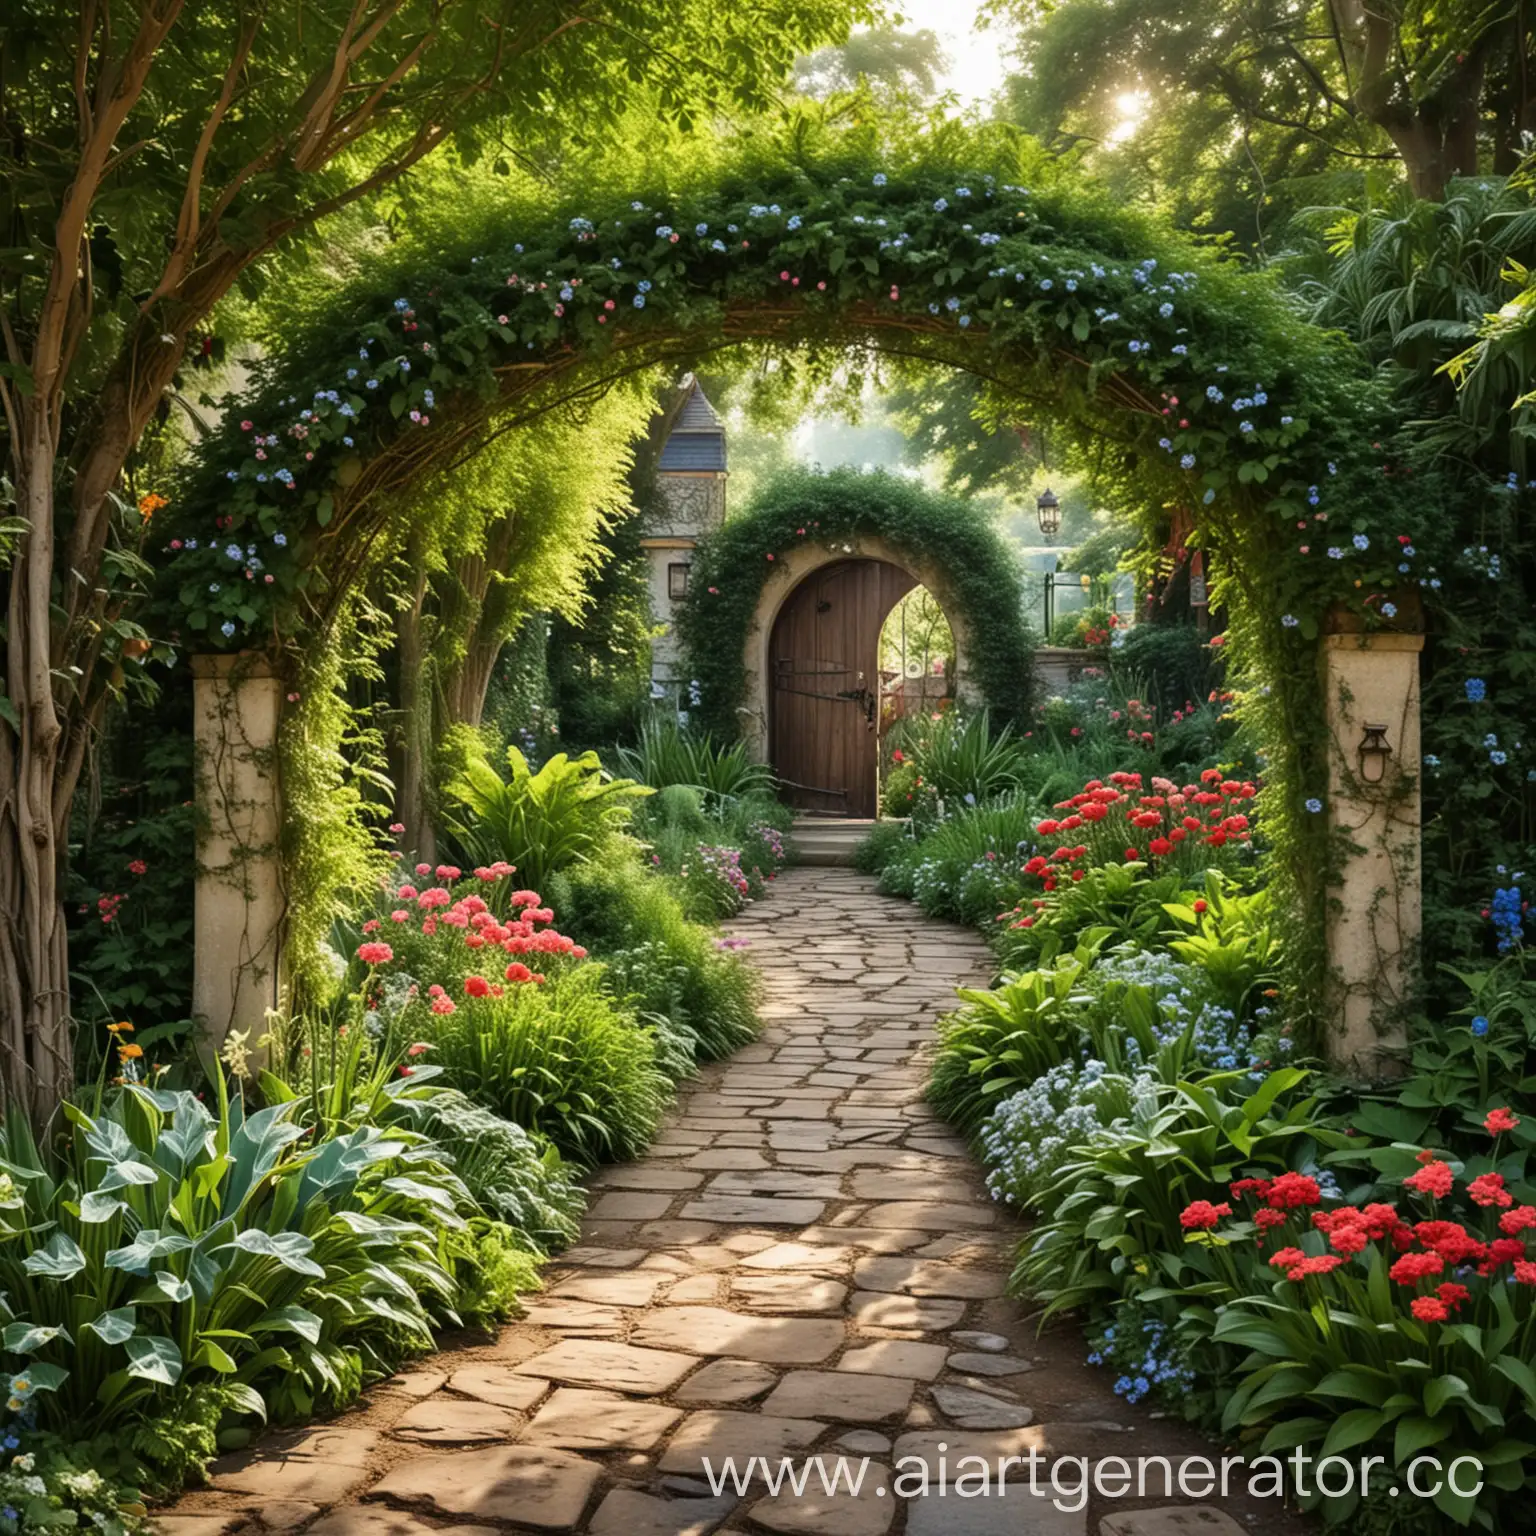 Enchanting-FairyTale-Garden-Entrance-Overflowing-with-Lush-Plants